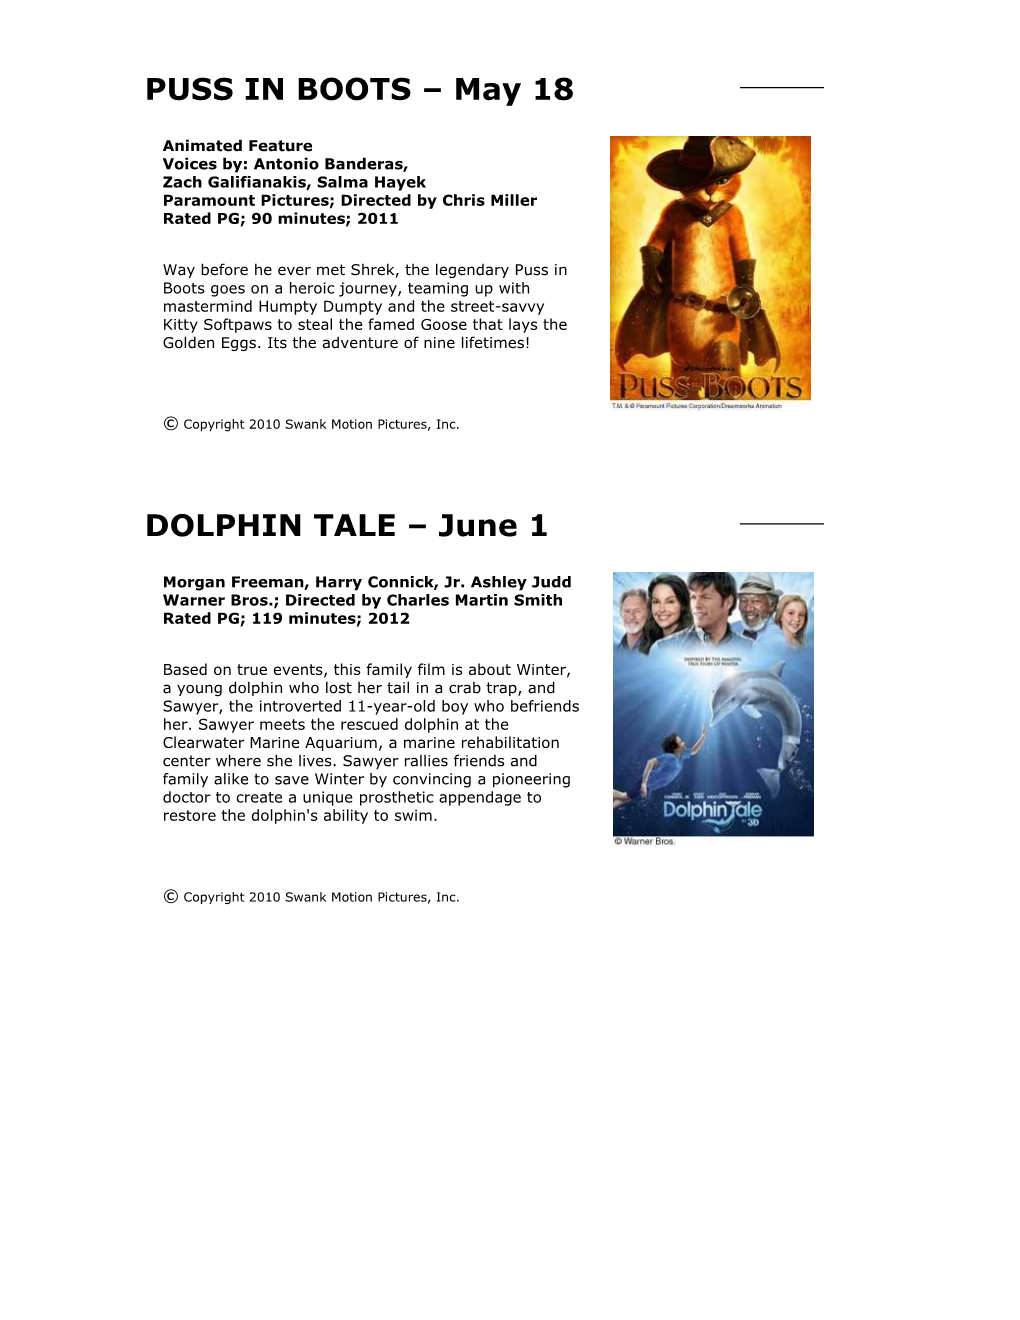 PUSS in BOOTS – May 18 DOLPHIN TALE